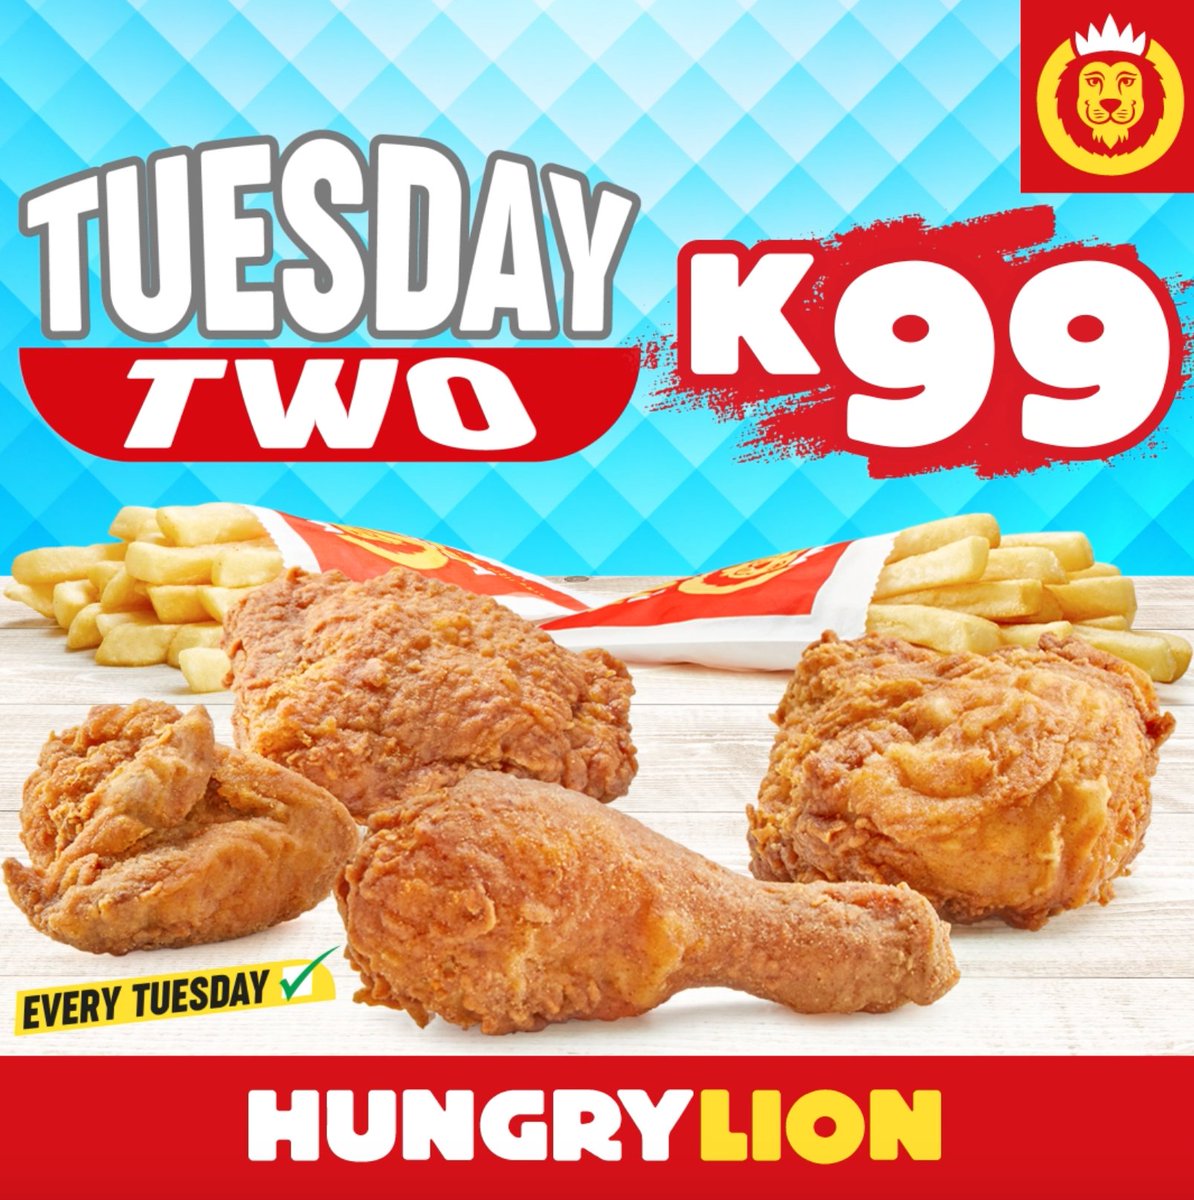 🍗🍟 4x BIGGER pieces & 2x Regular chips for K99... the only question is: Do you share with someone or finish everything on your own? 😉 Grab our TuesdayTwo deal today! 🍗🍟 Available at all stores. Every Tuesday. #HungryLikeALion